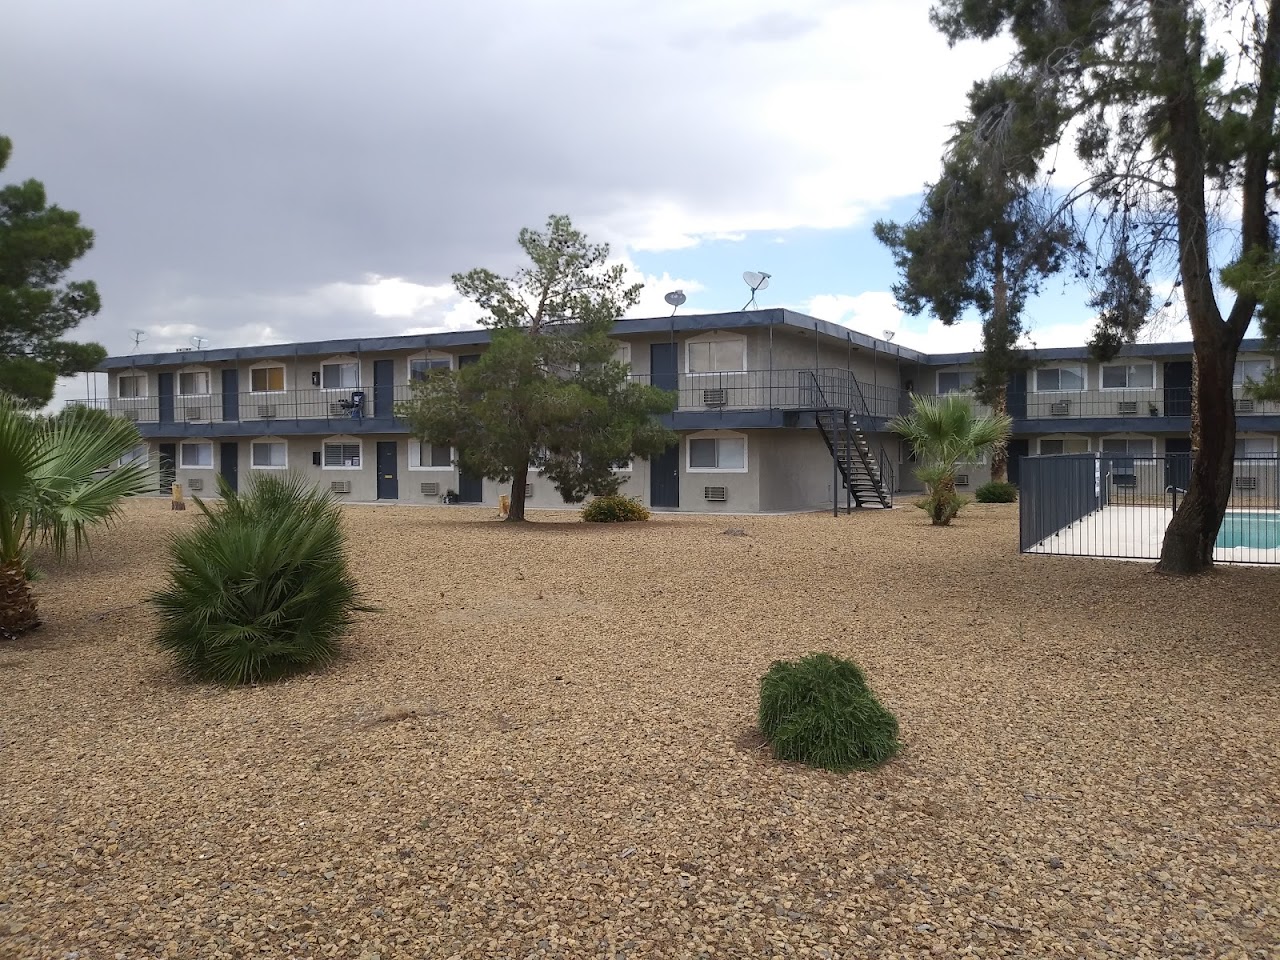 Photo of TAMMANY HALL APTS II. Affordable housing located at 4386 ESCONDIDO ST LAS VEGAS, NV 89119